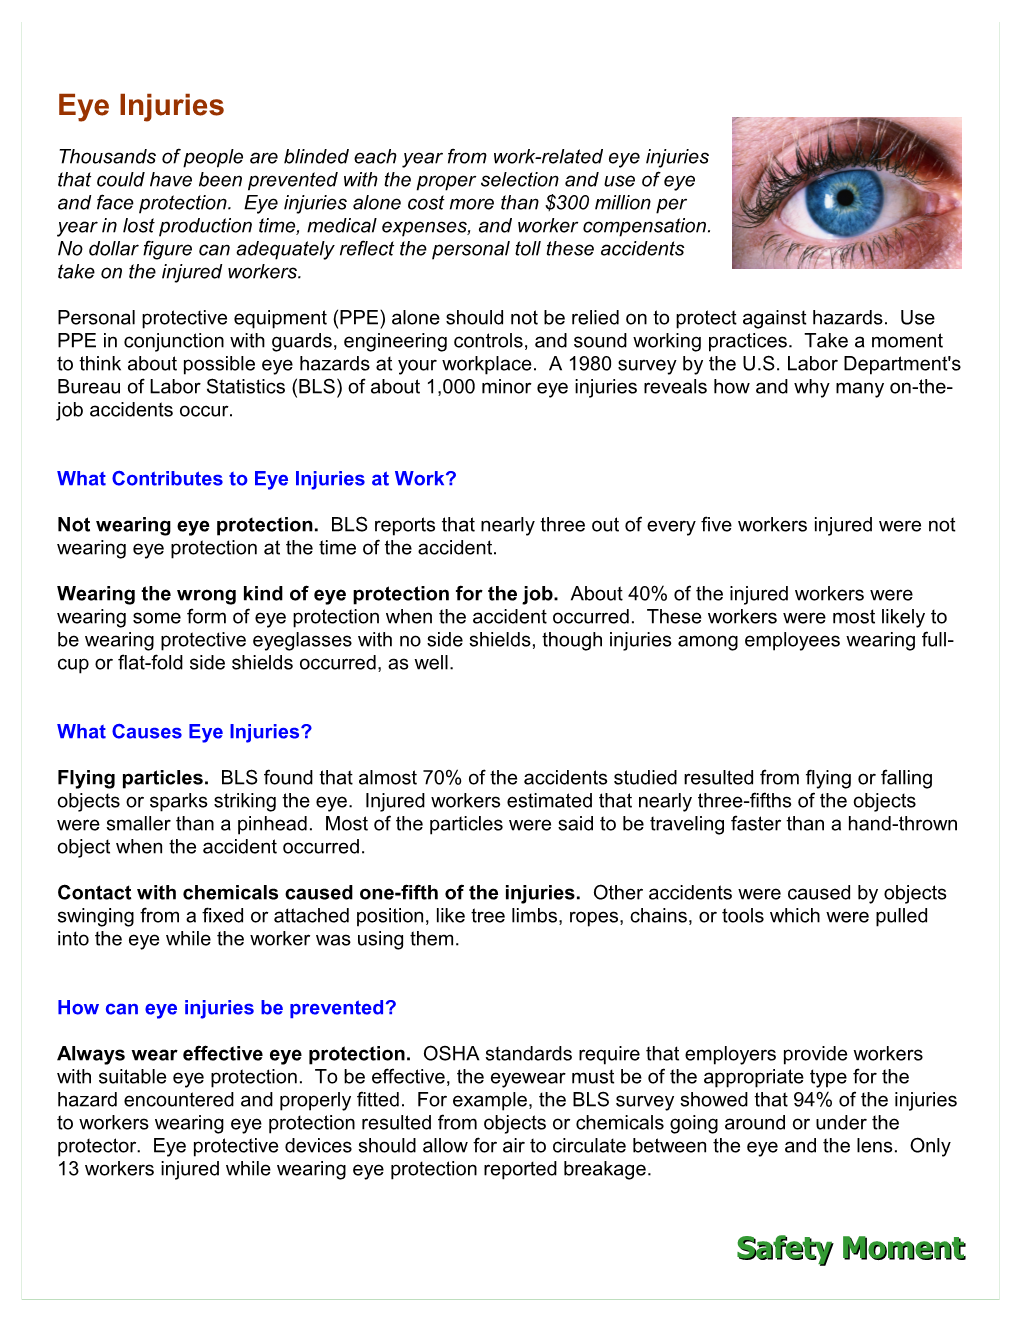 What Contributes to Eye Injuries at Work?